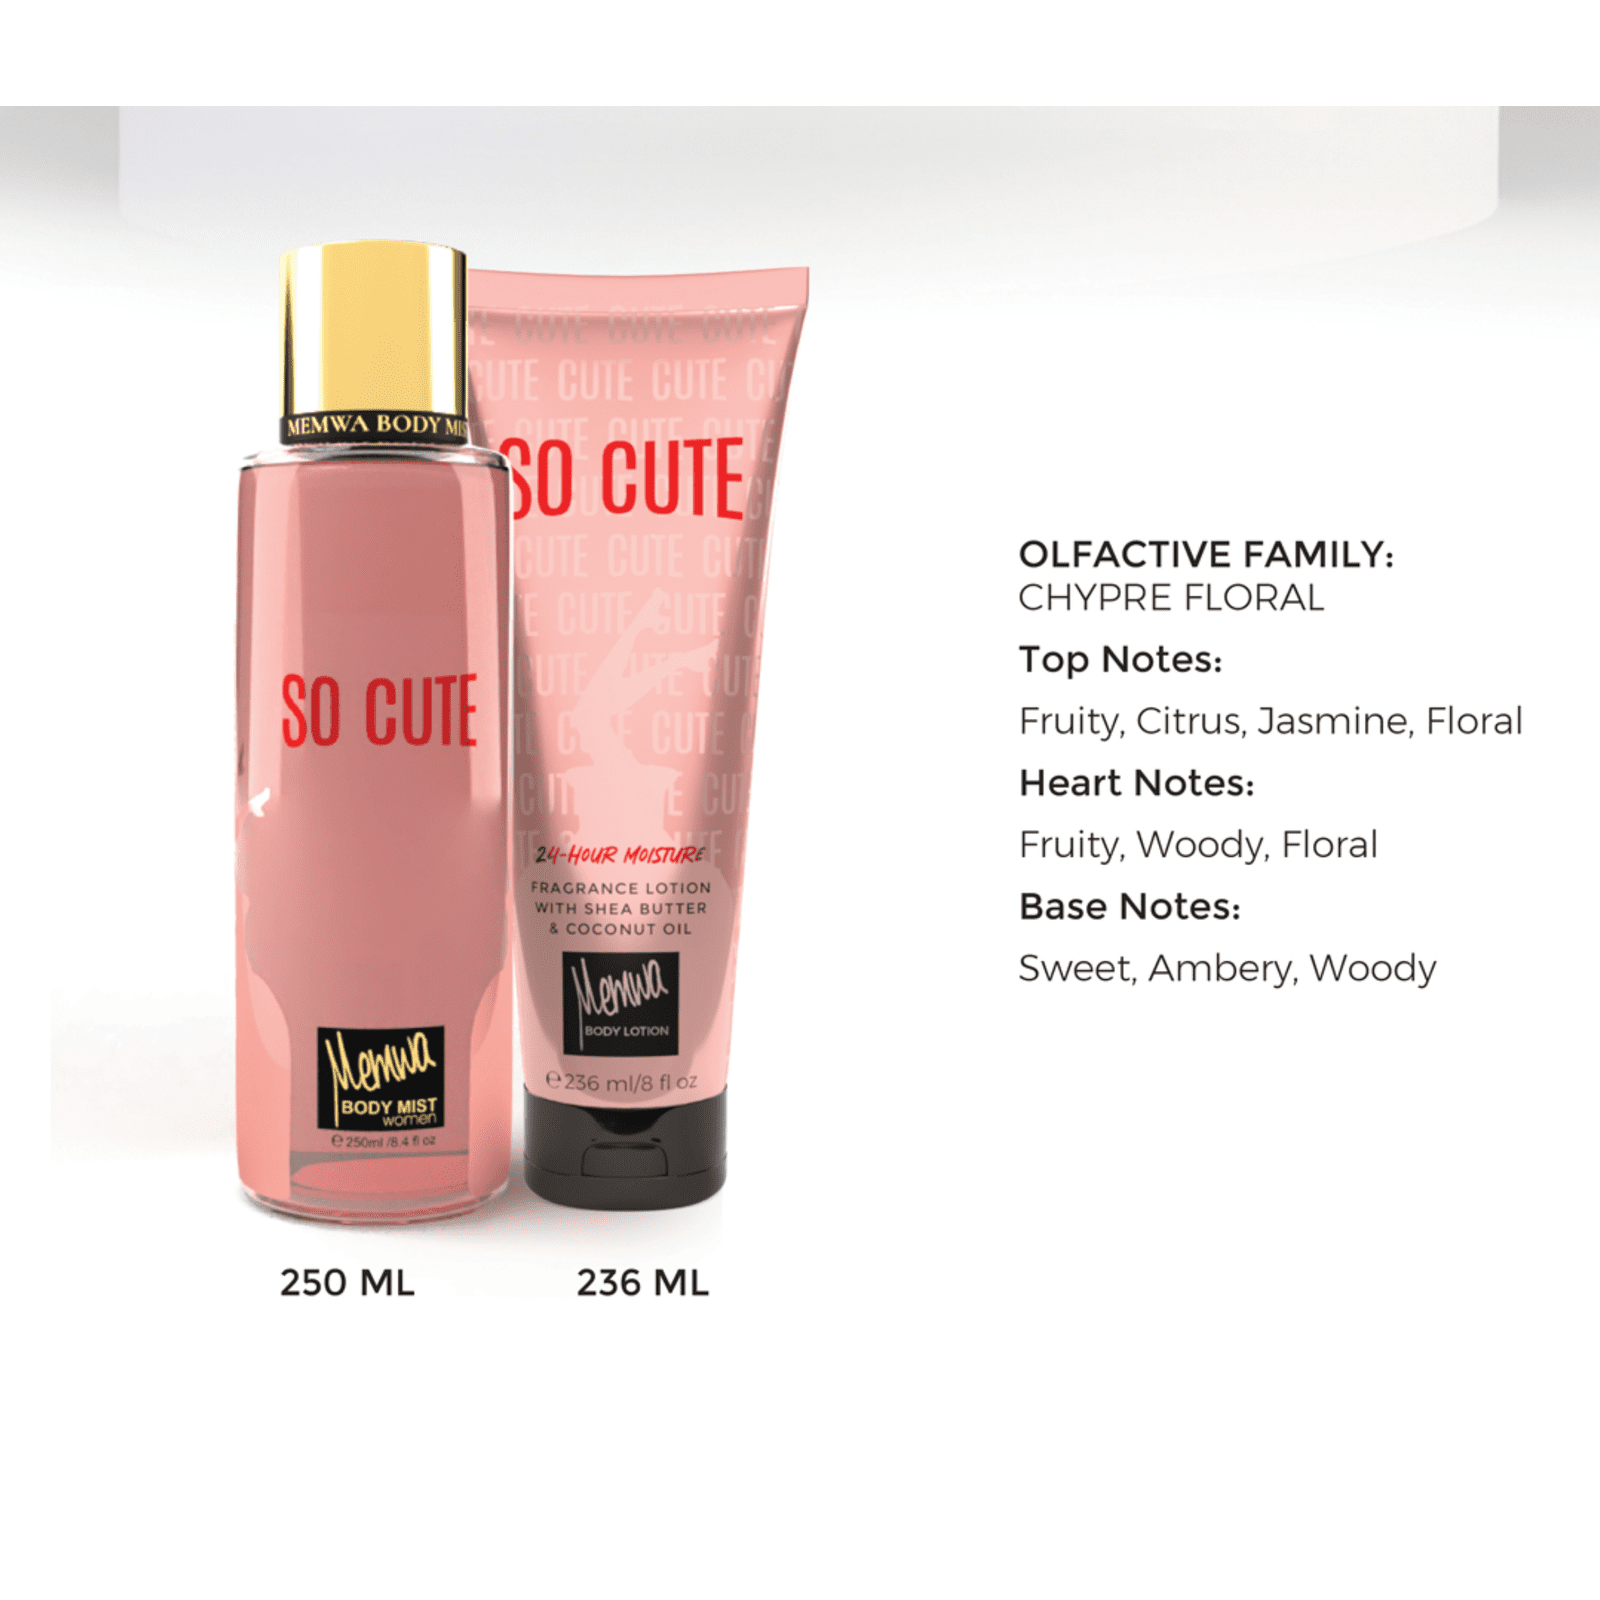 So Cute - Body Myst and Lotion By Memwa